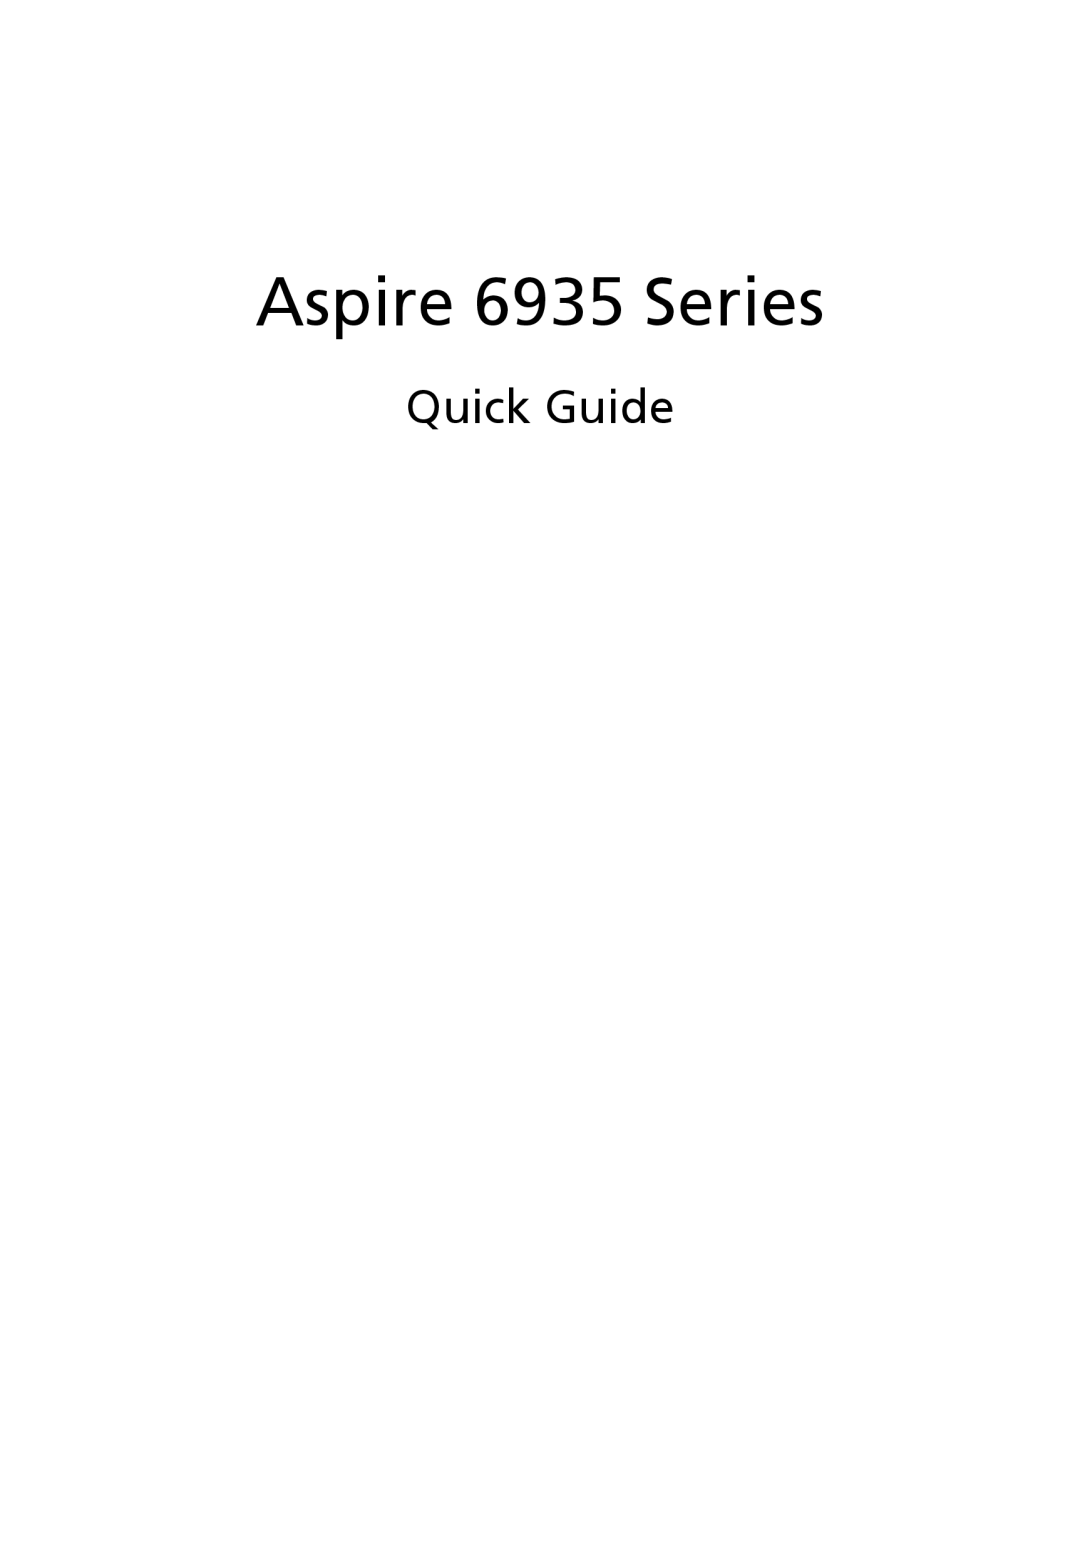 Acer manual Quick Guide, Aspire 6935 Series 